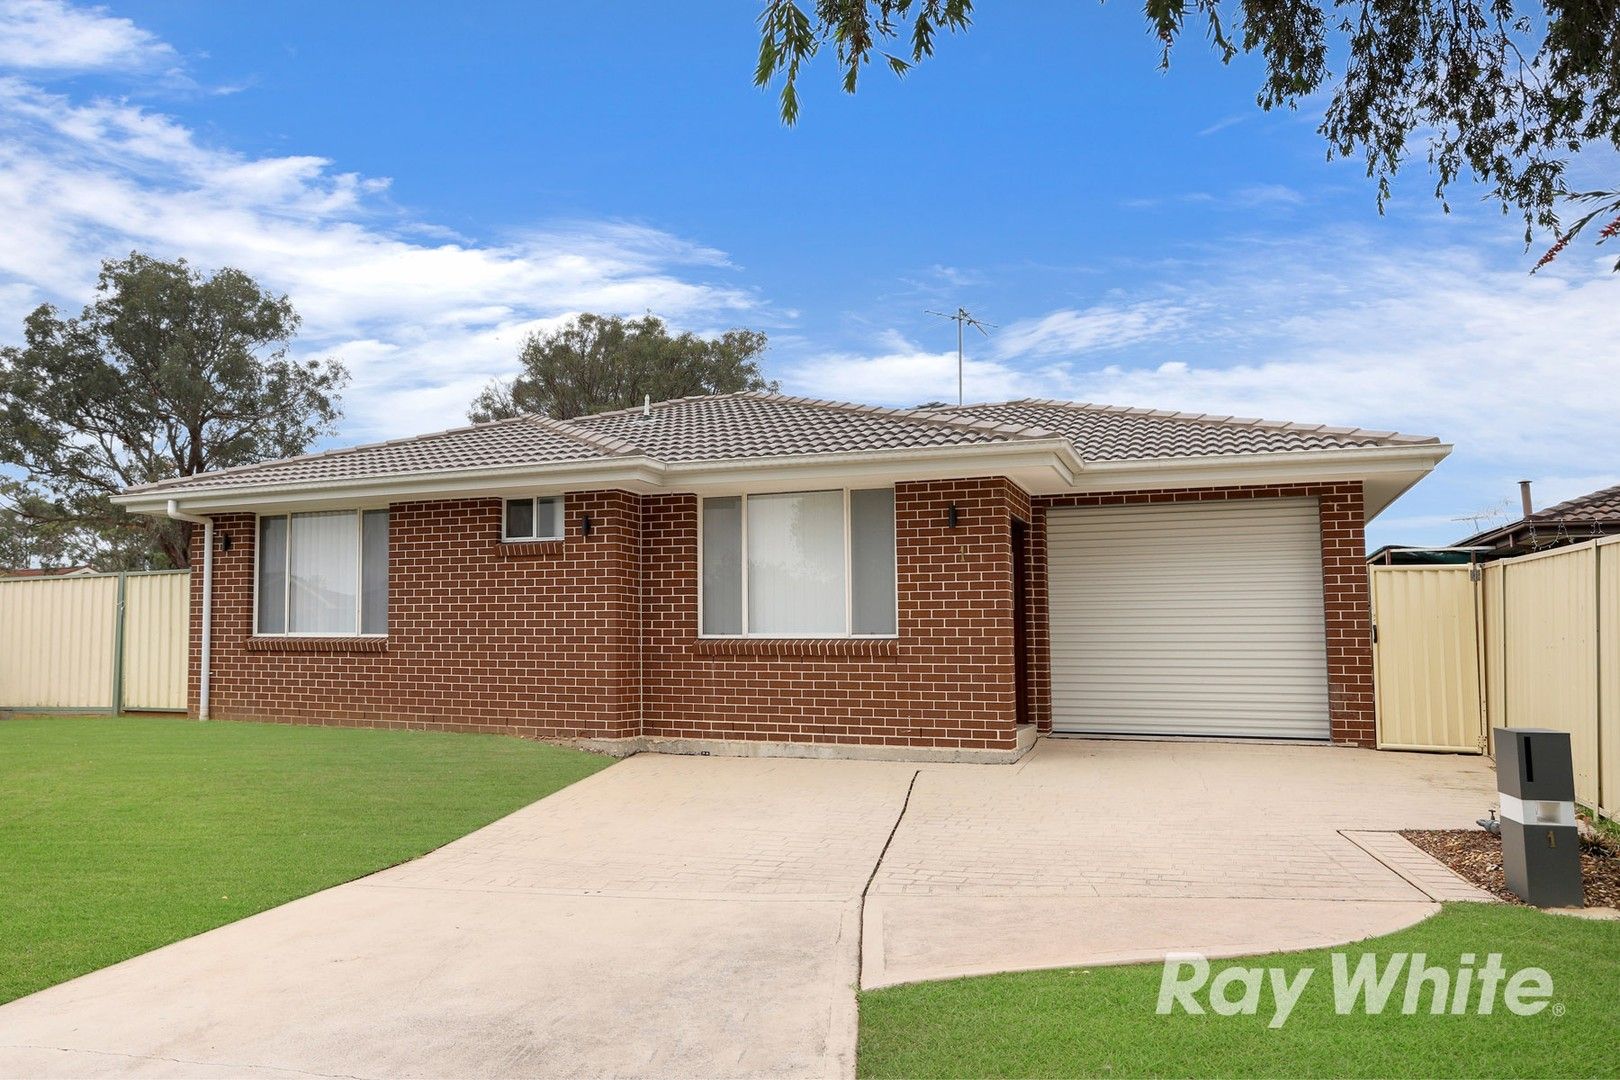 3 bedrooms House in 1 Ola Place OAKHURST NSW, 2761